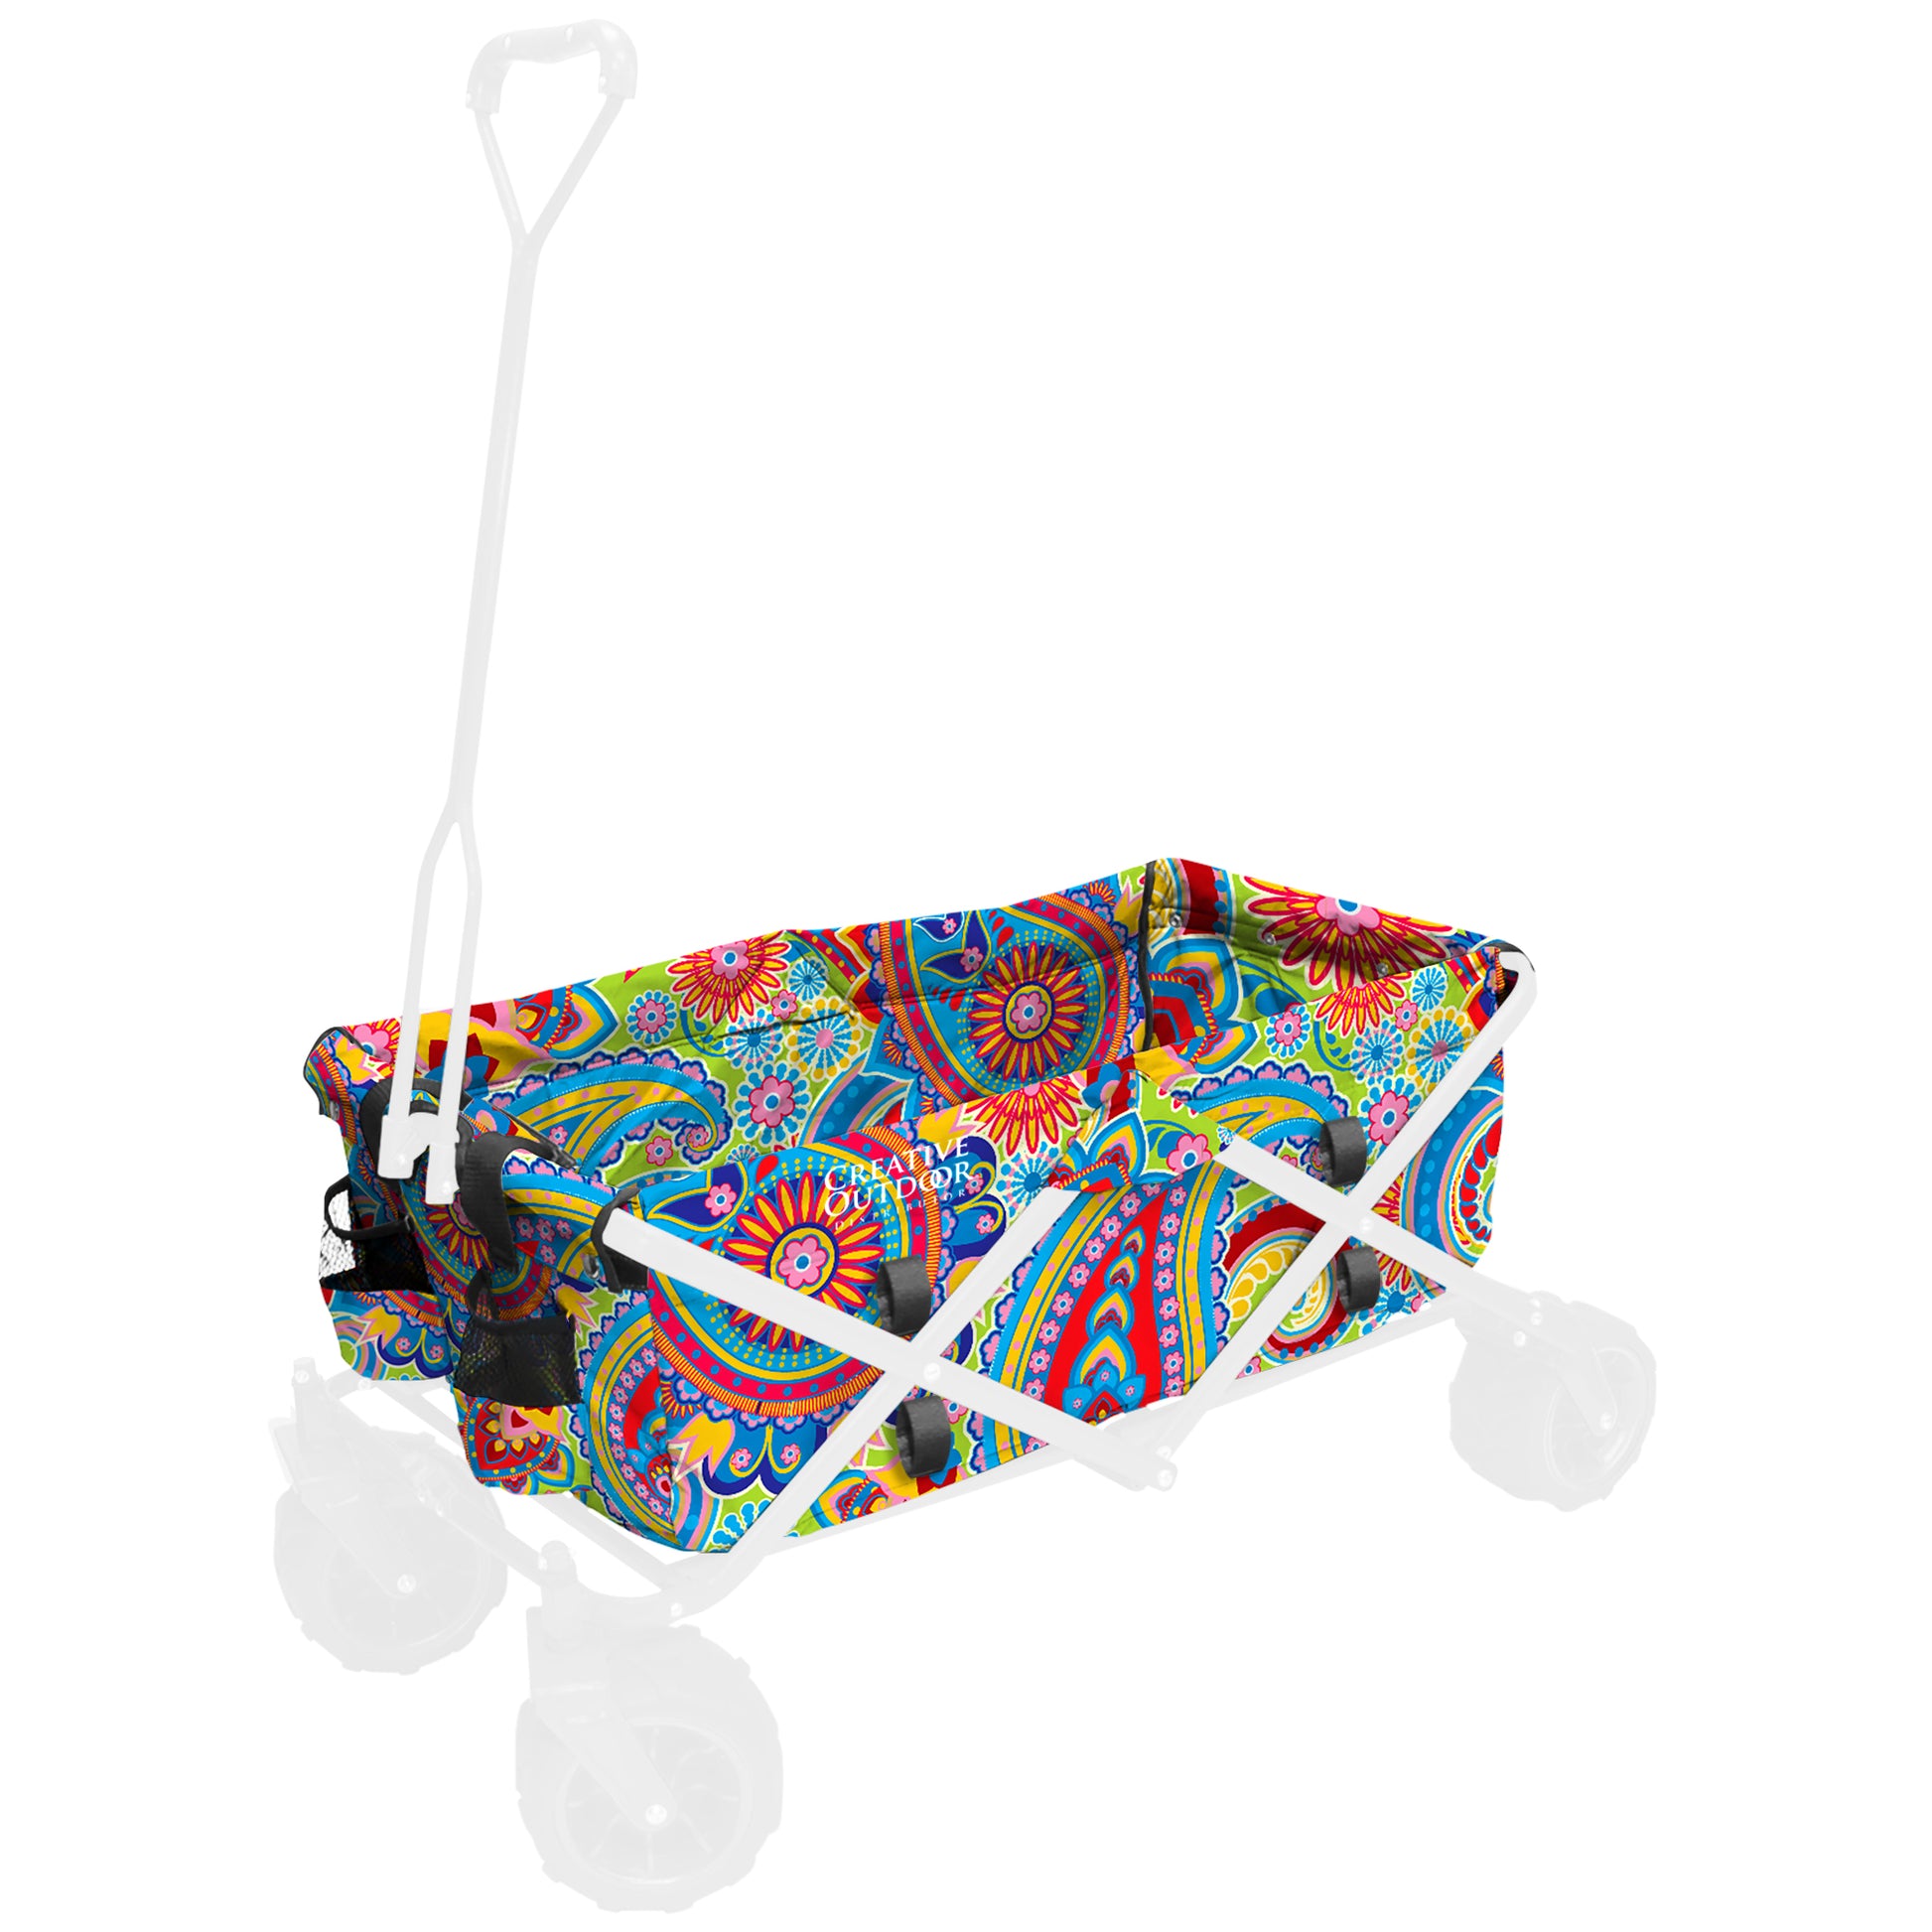 All-Terrain Folding Wagon Replacement Fabric - PAISLEY